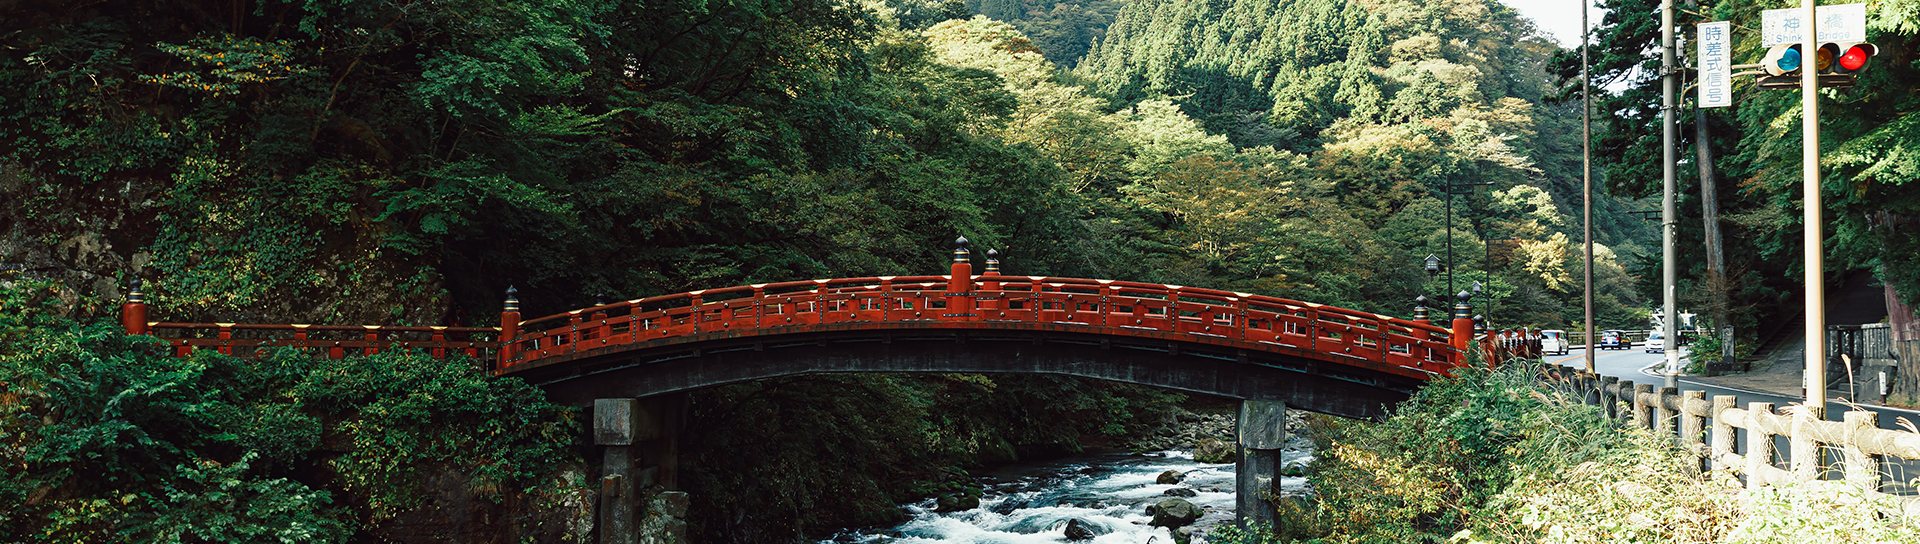 traditional japanese bridge with red accents in the forest